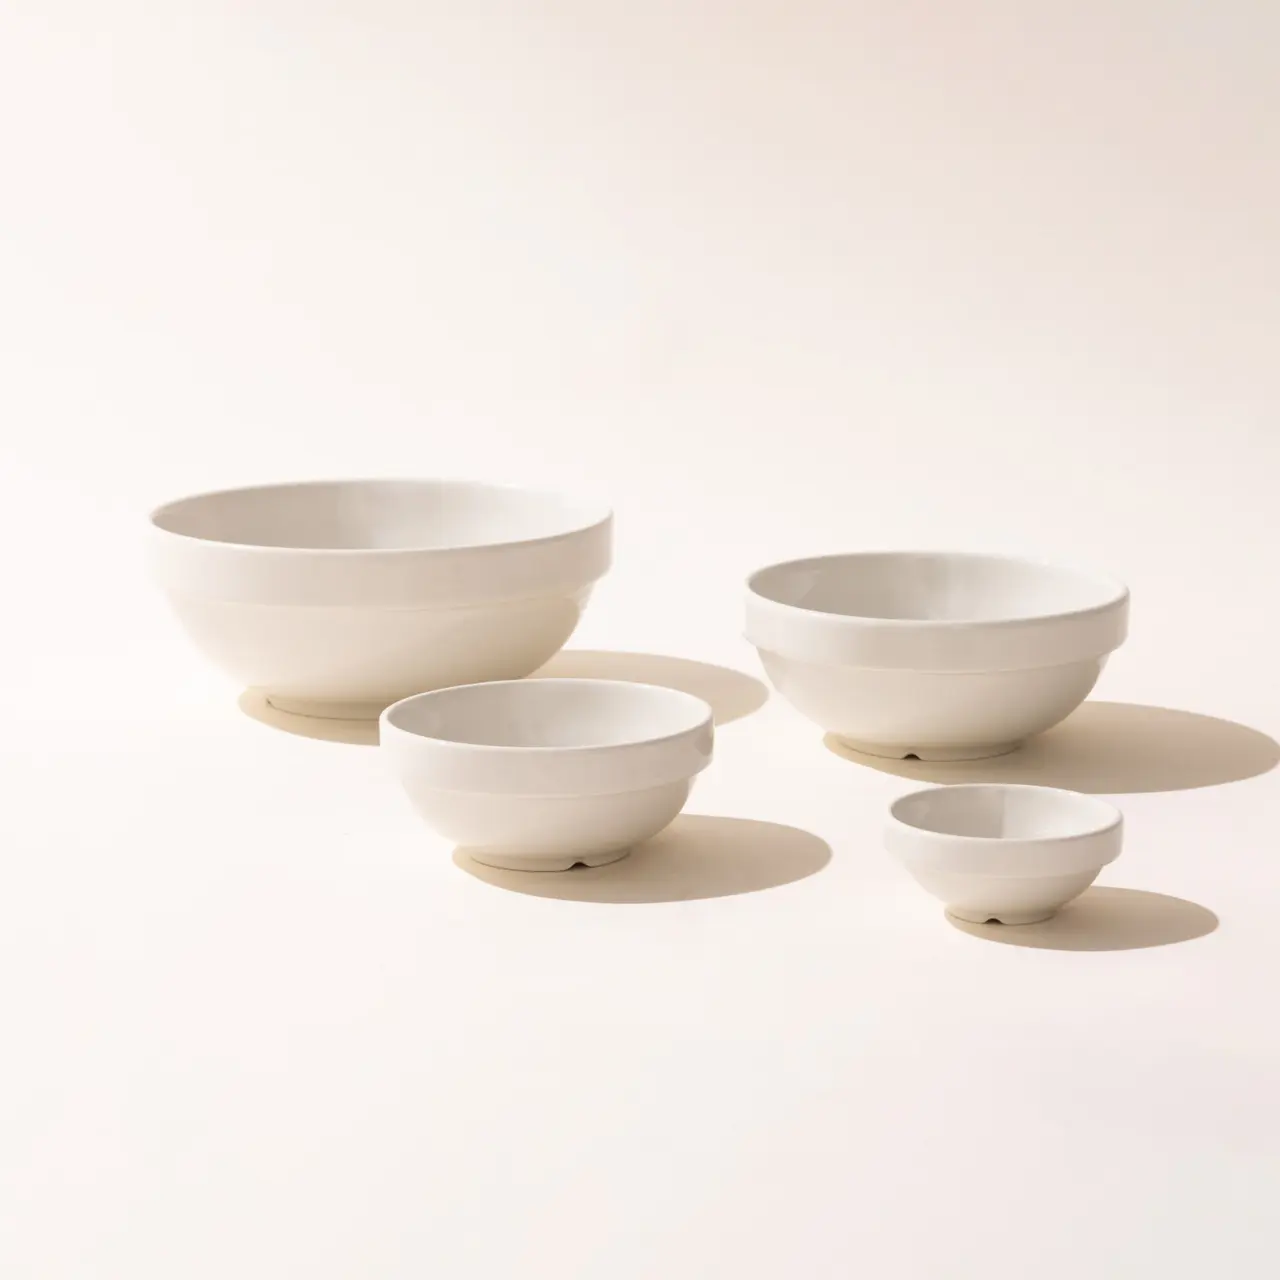 Four white bowls of varying sizes are arranged in a descending order on a light background.